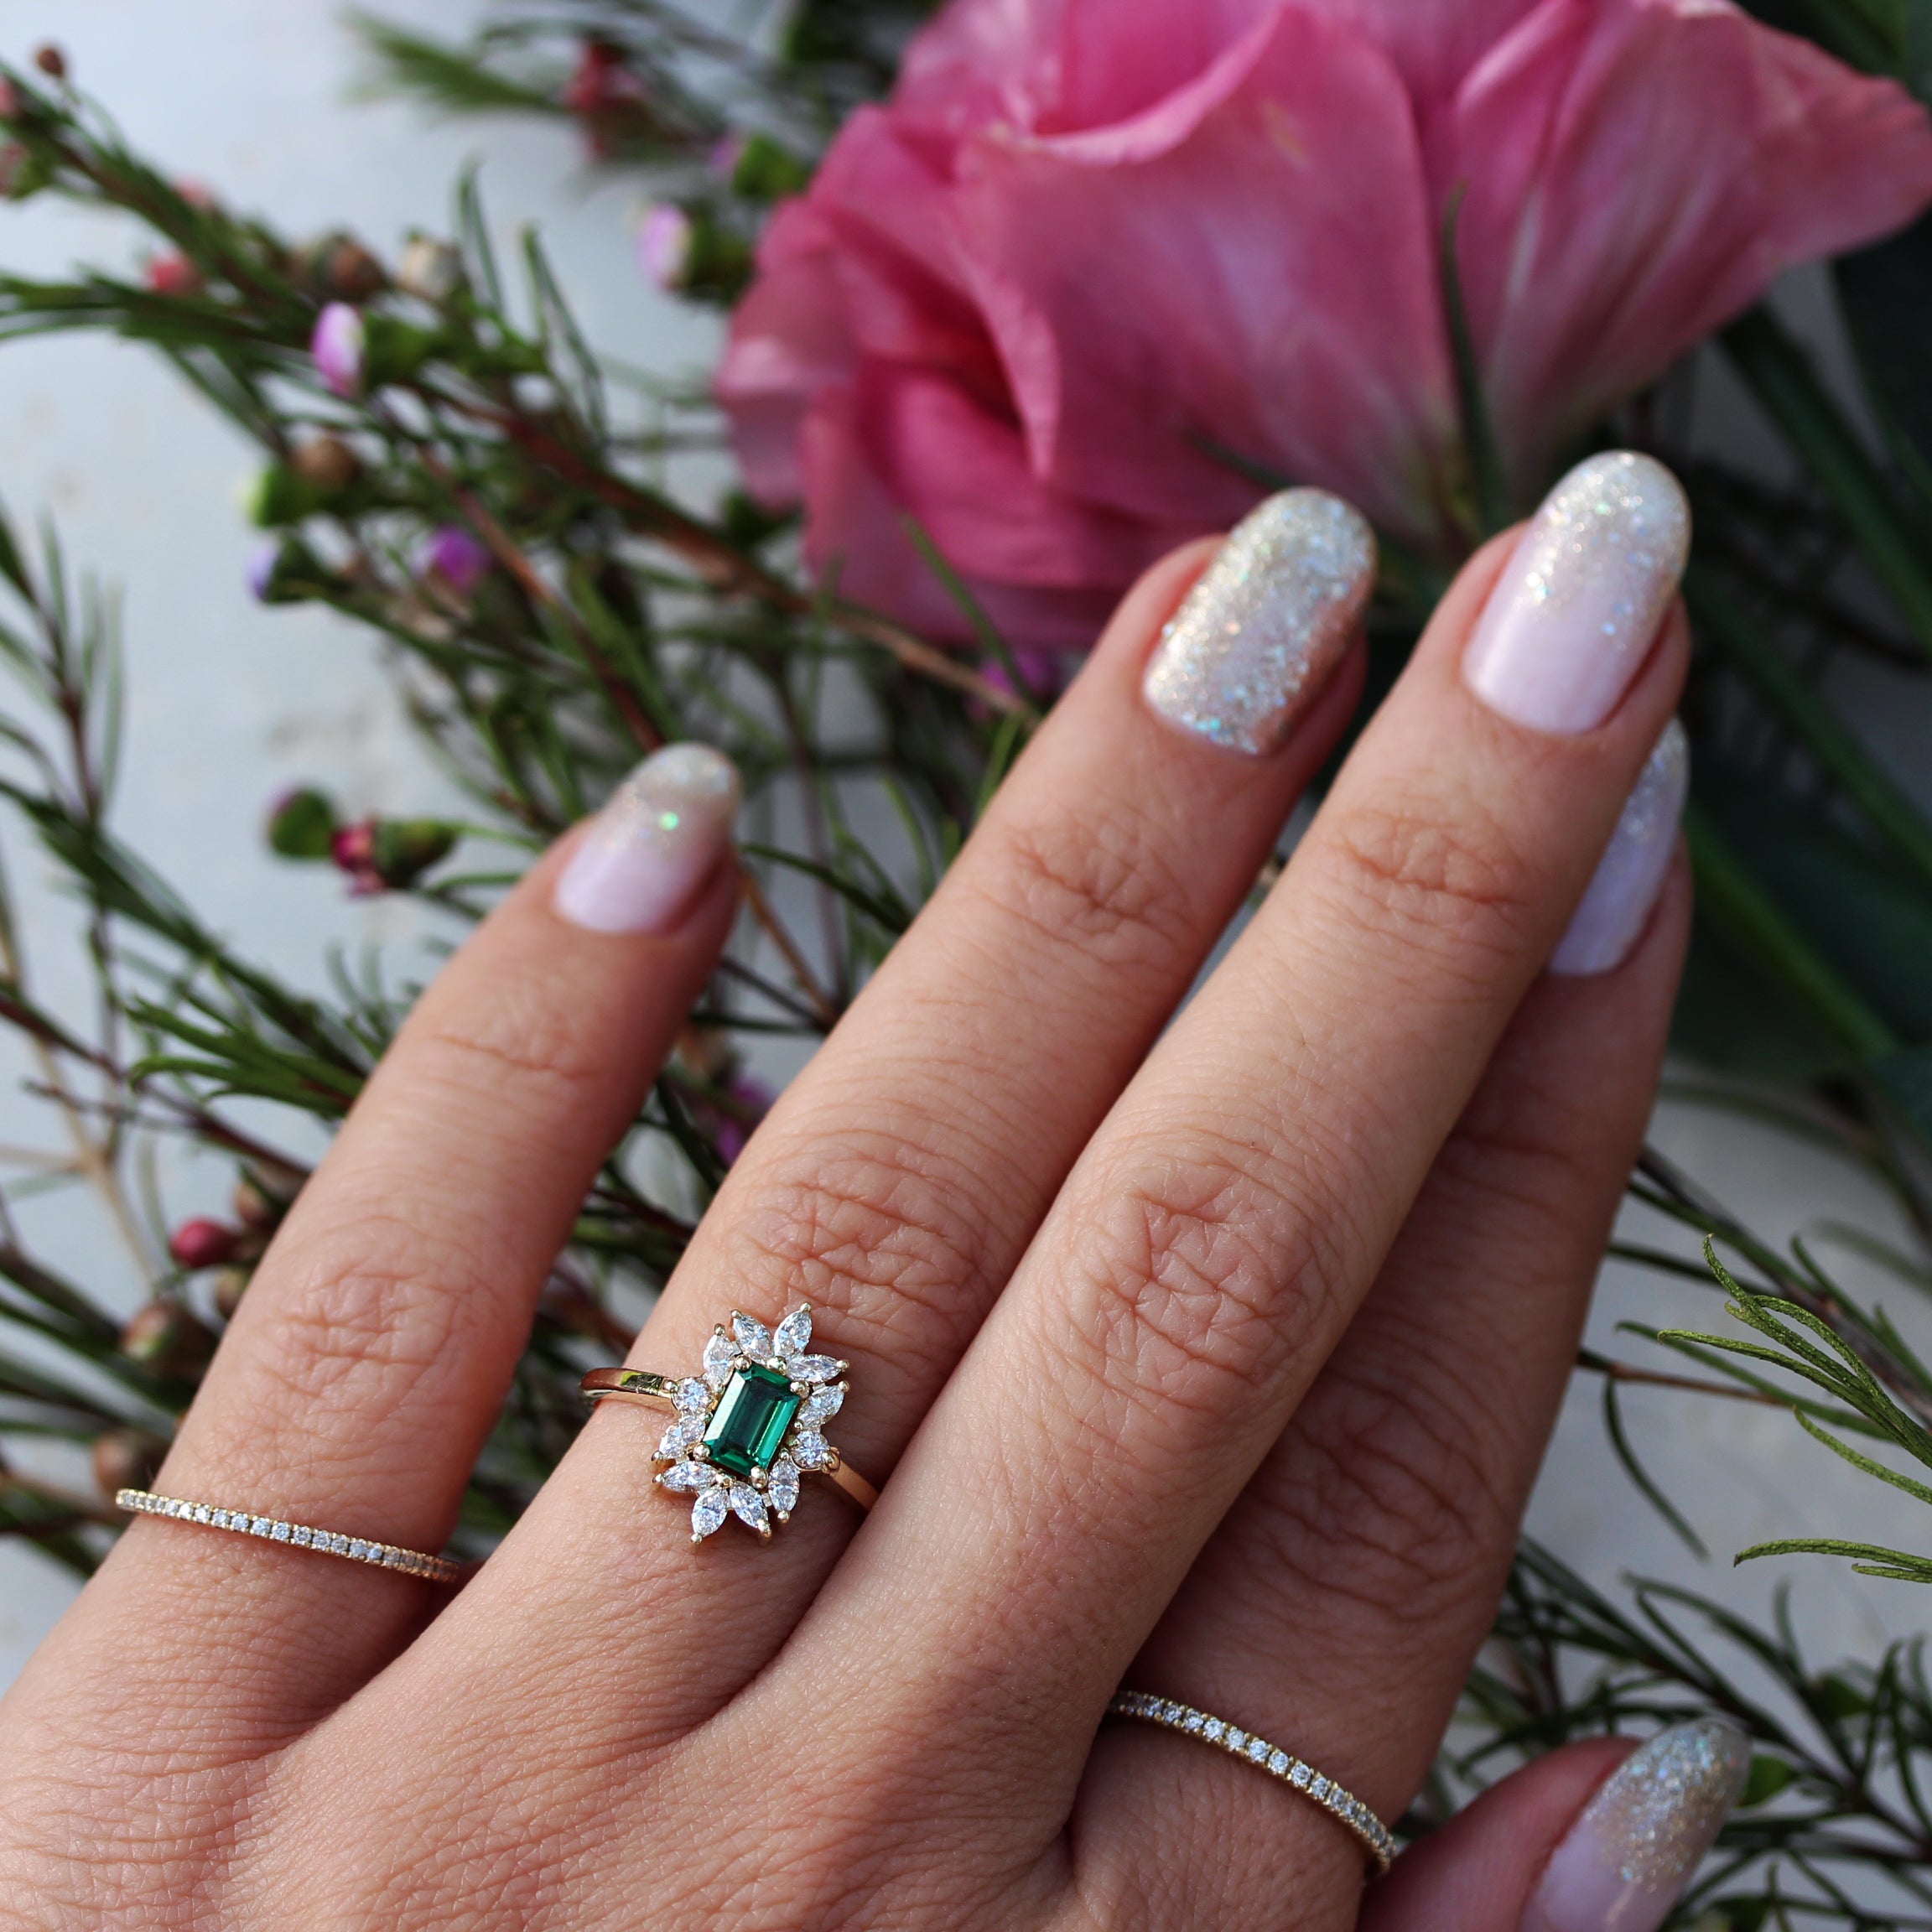 The 23 Best Emerald Engagement Rings - hitched.co.uk - hitched.co.uk